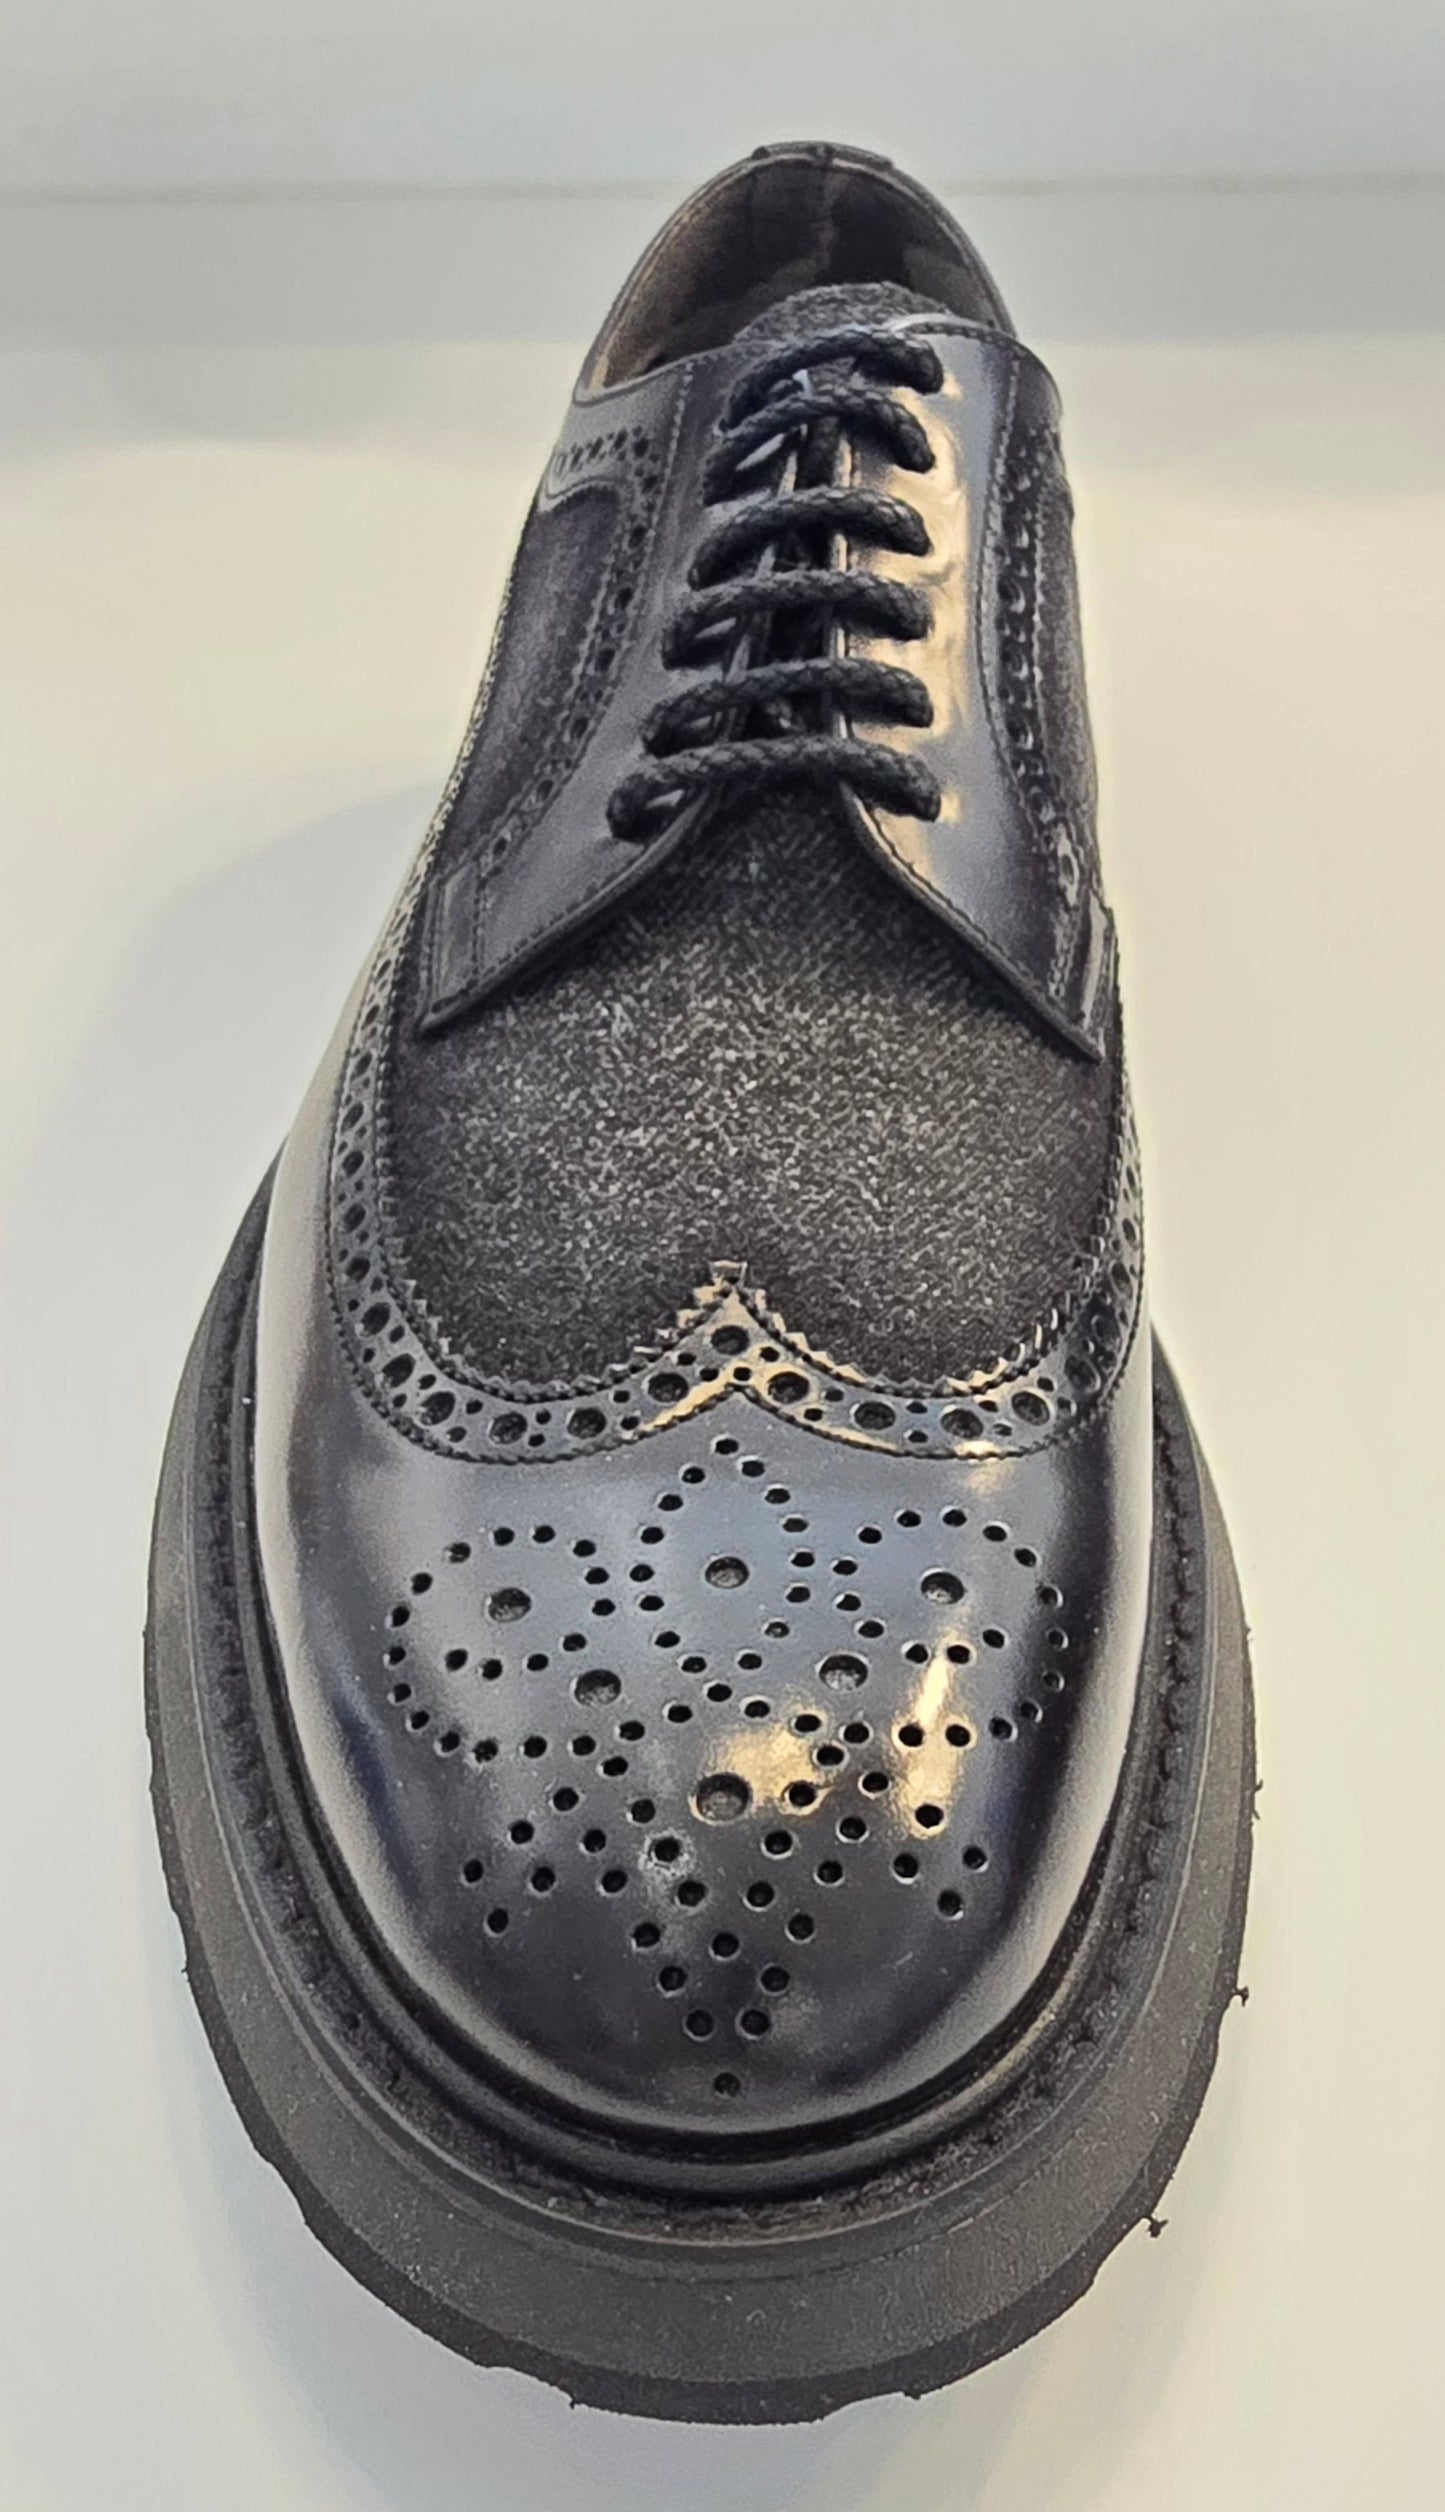 Calce Leather Shoes - Oxford Brogue Nappa Leather